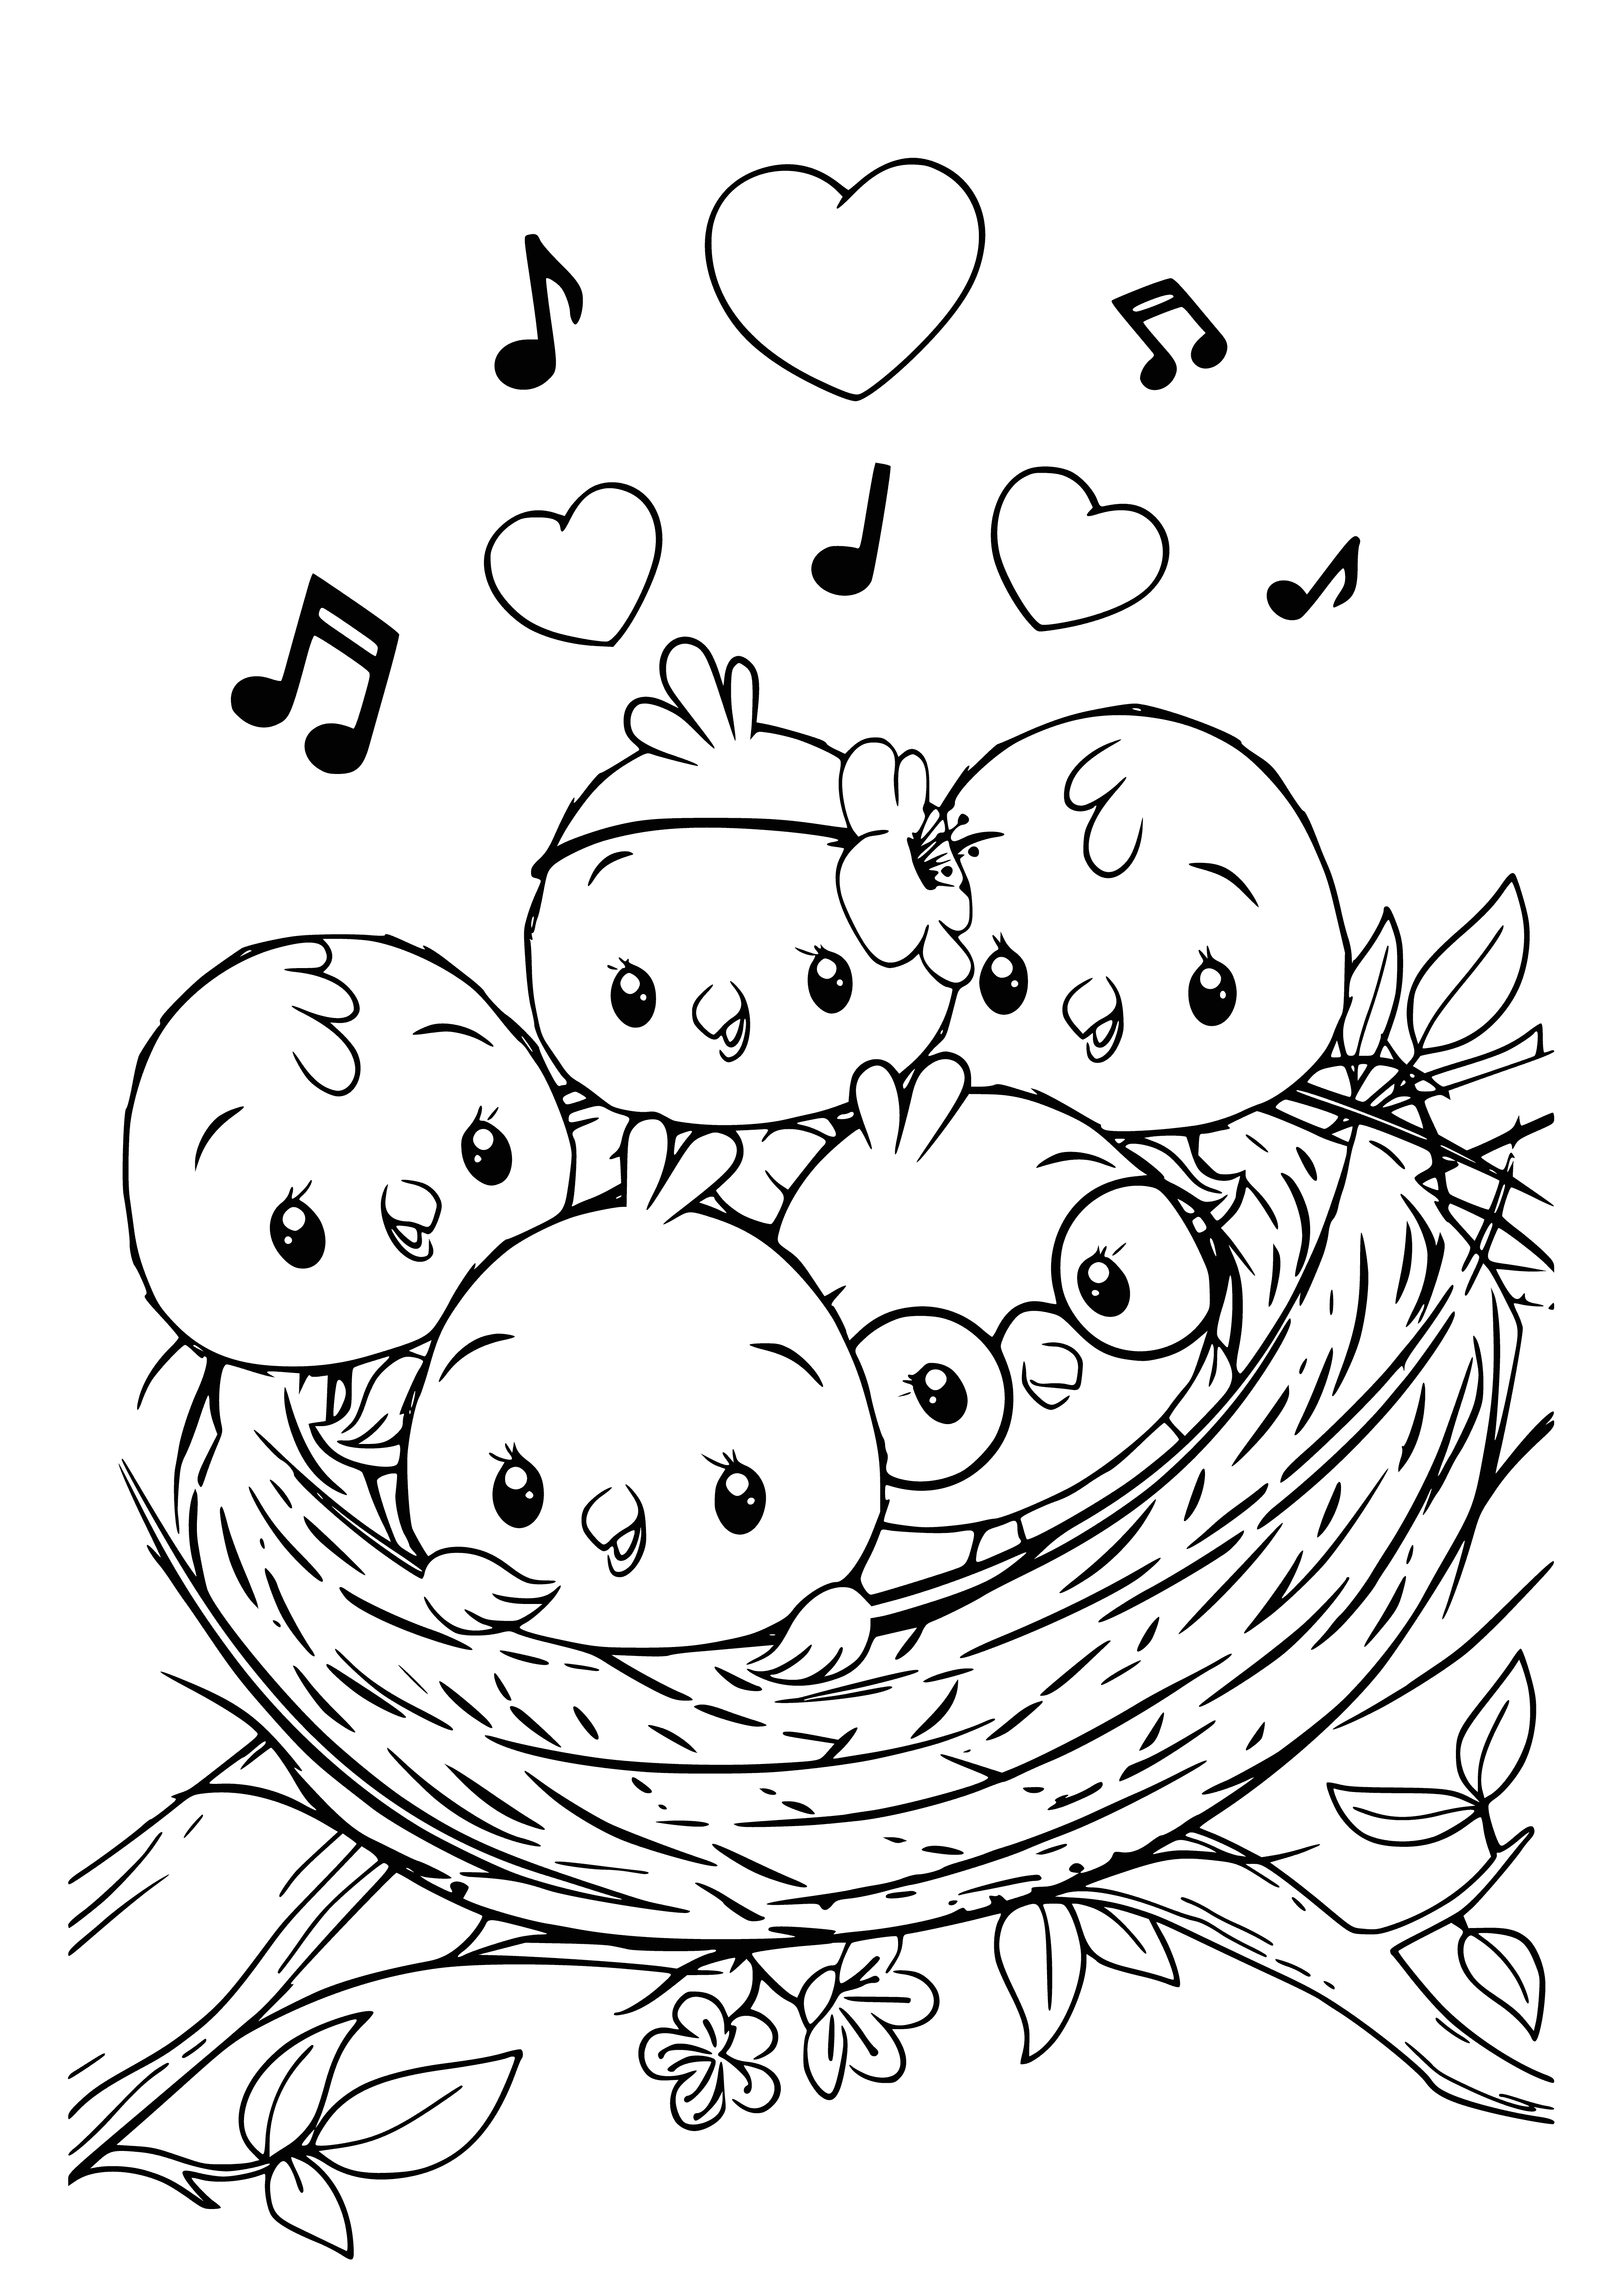 coloring page: Two yellow chicks in a nest: one peeking, one sleeping with orange beaks. Color them in! #coloringpage